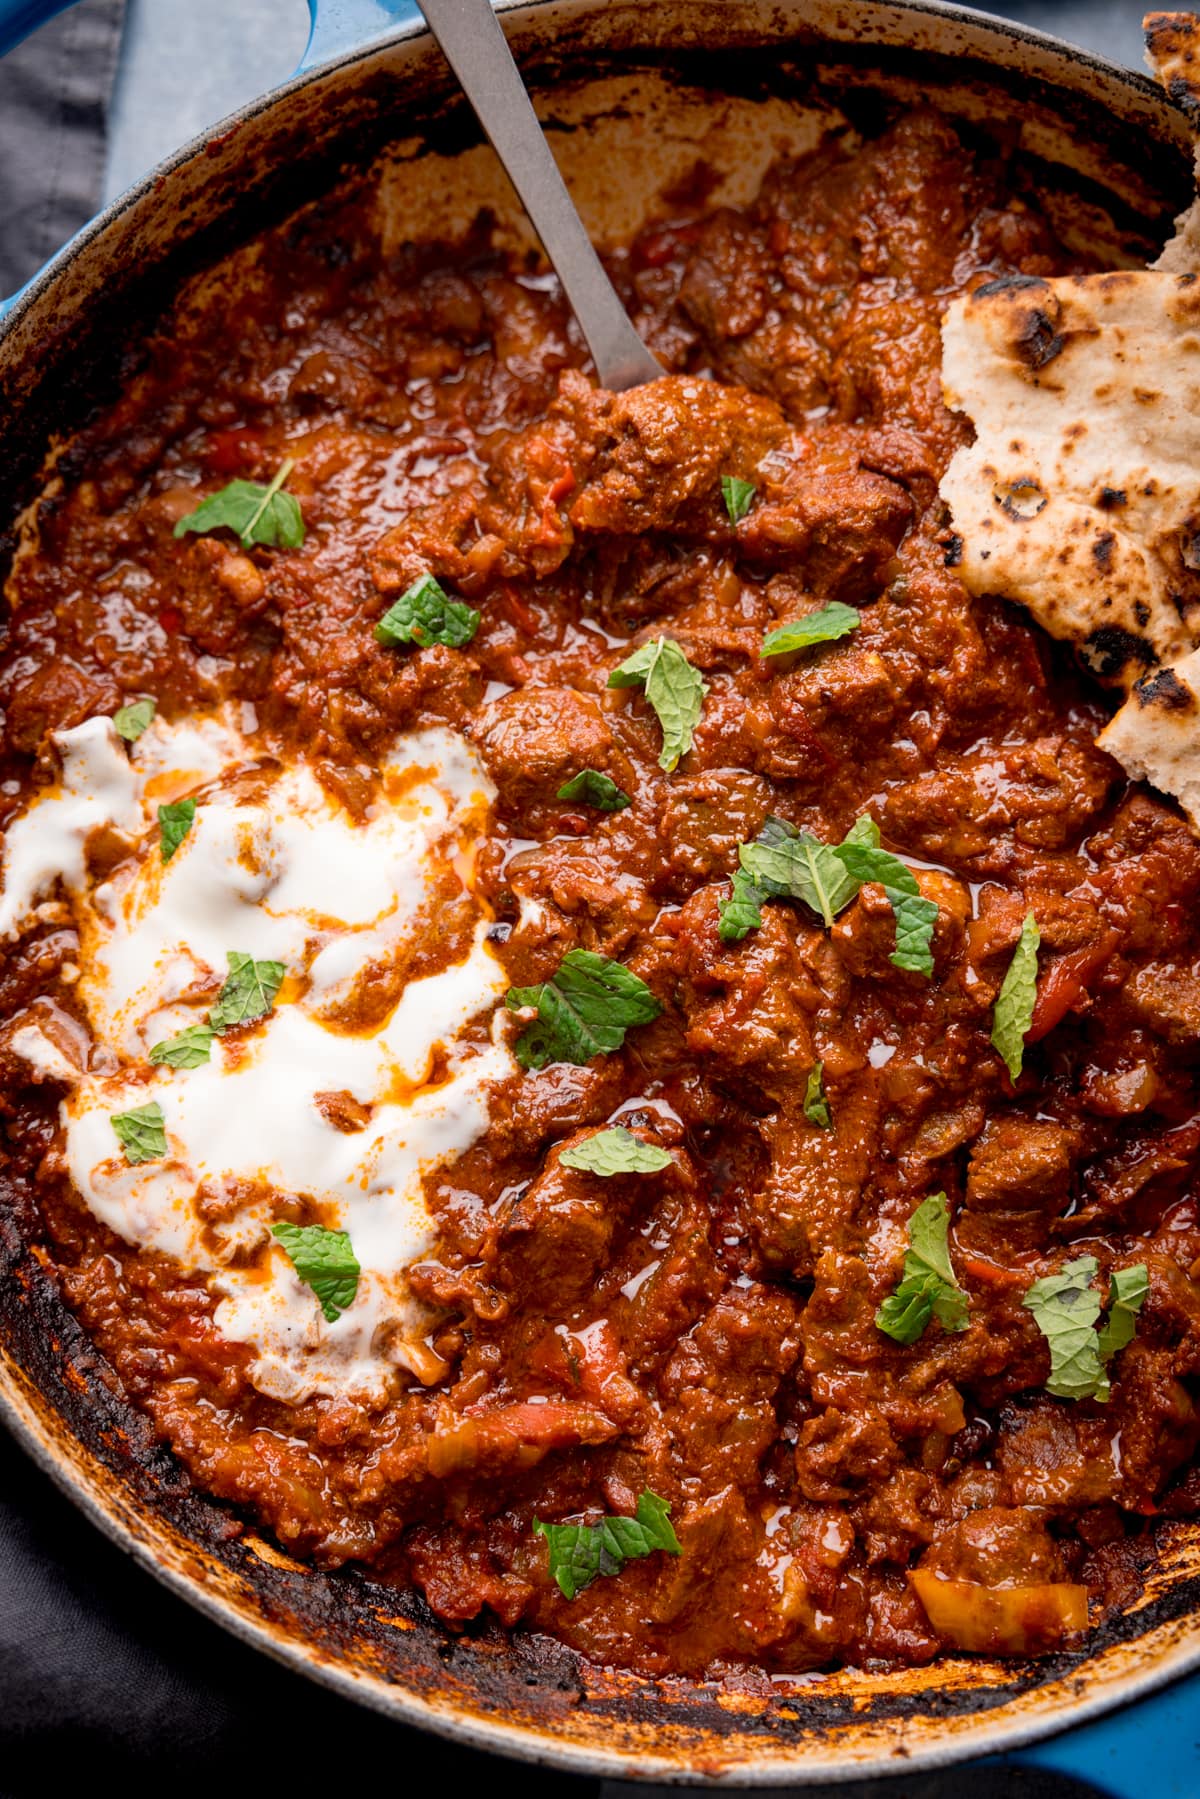 Overhead close-up image of Beef Rogan Josh in a blue pan. The curry is topped with chopped mint leaves, a swirl of plain yogurt and some torn chapati. There is a silver serving spoon sticking out of the curry.